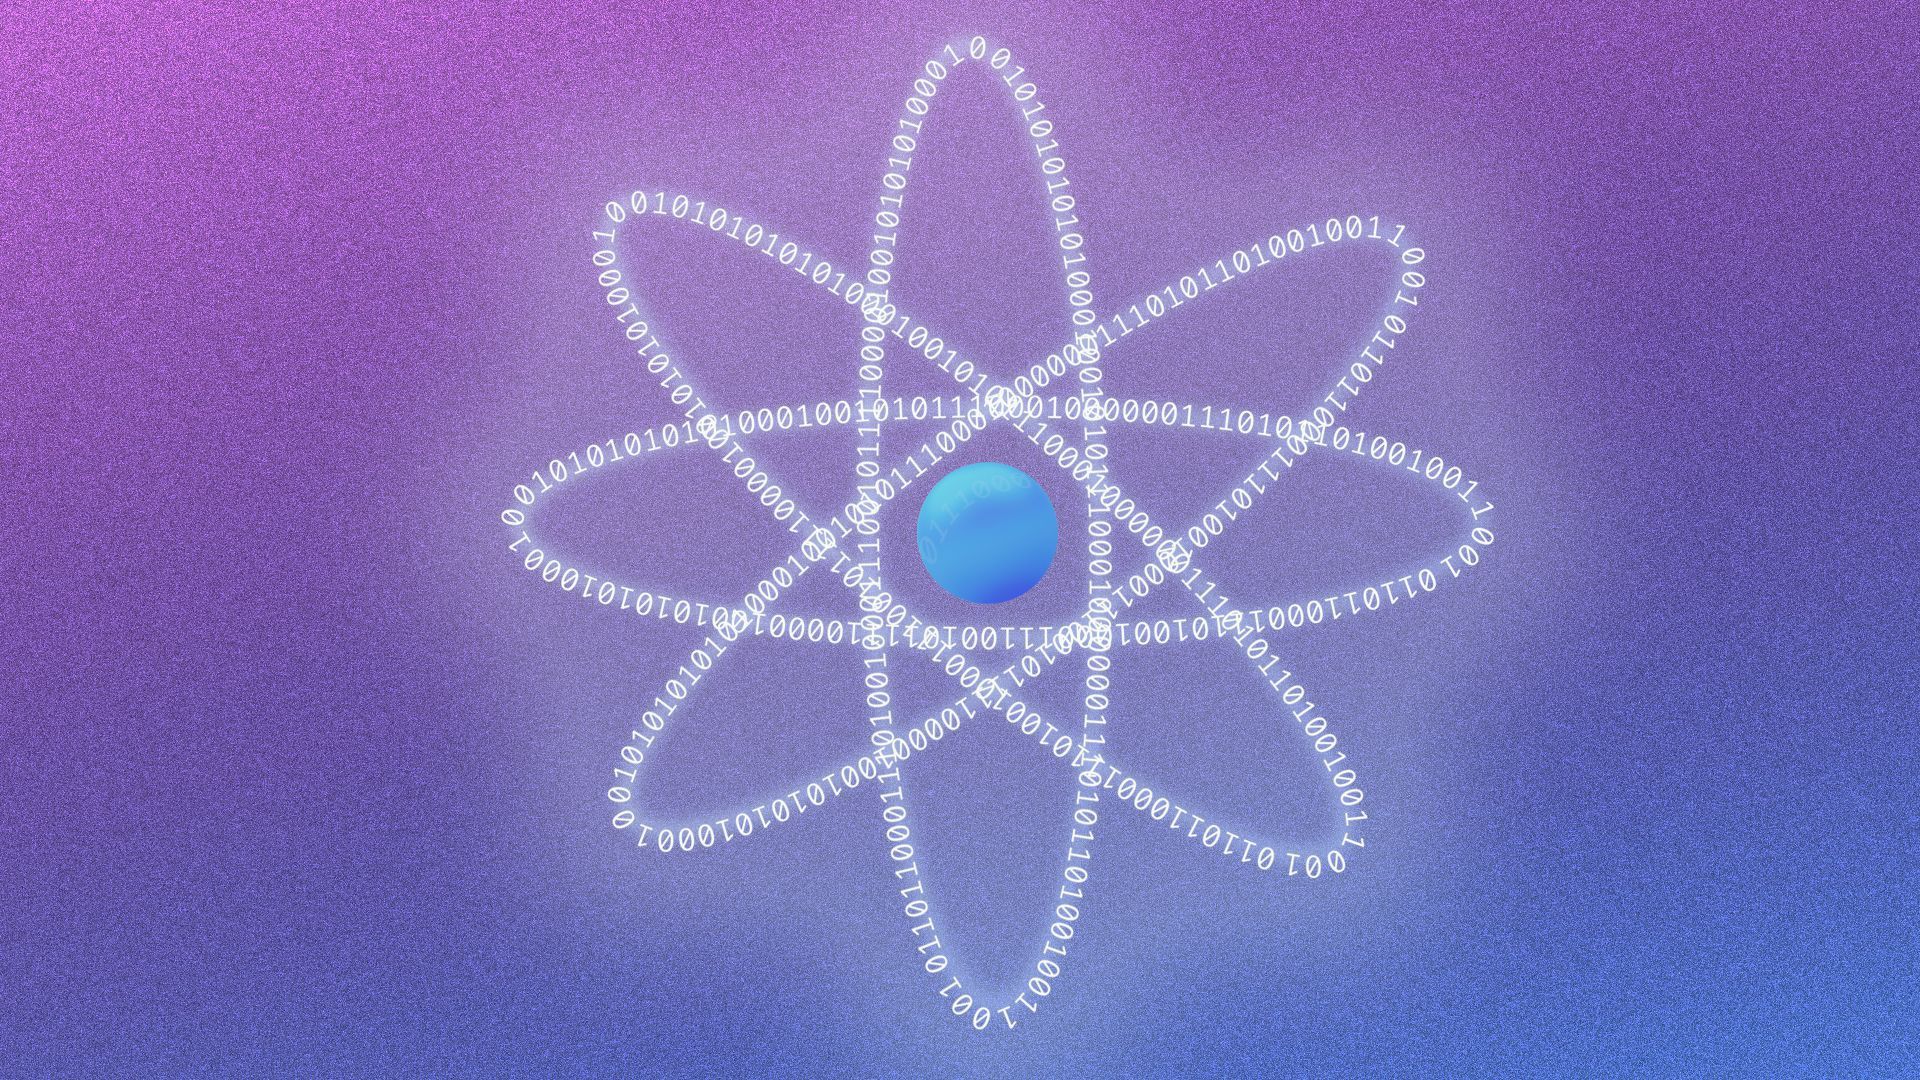 Illustration of quantum by showing an atom with electrons swirling around that are binary numbers